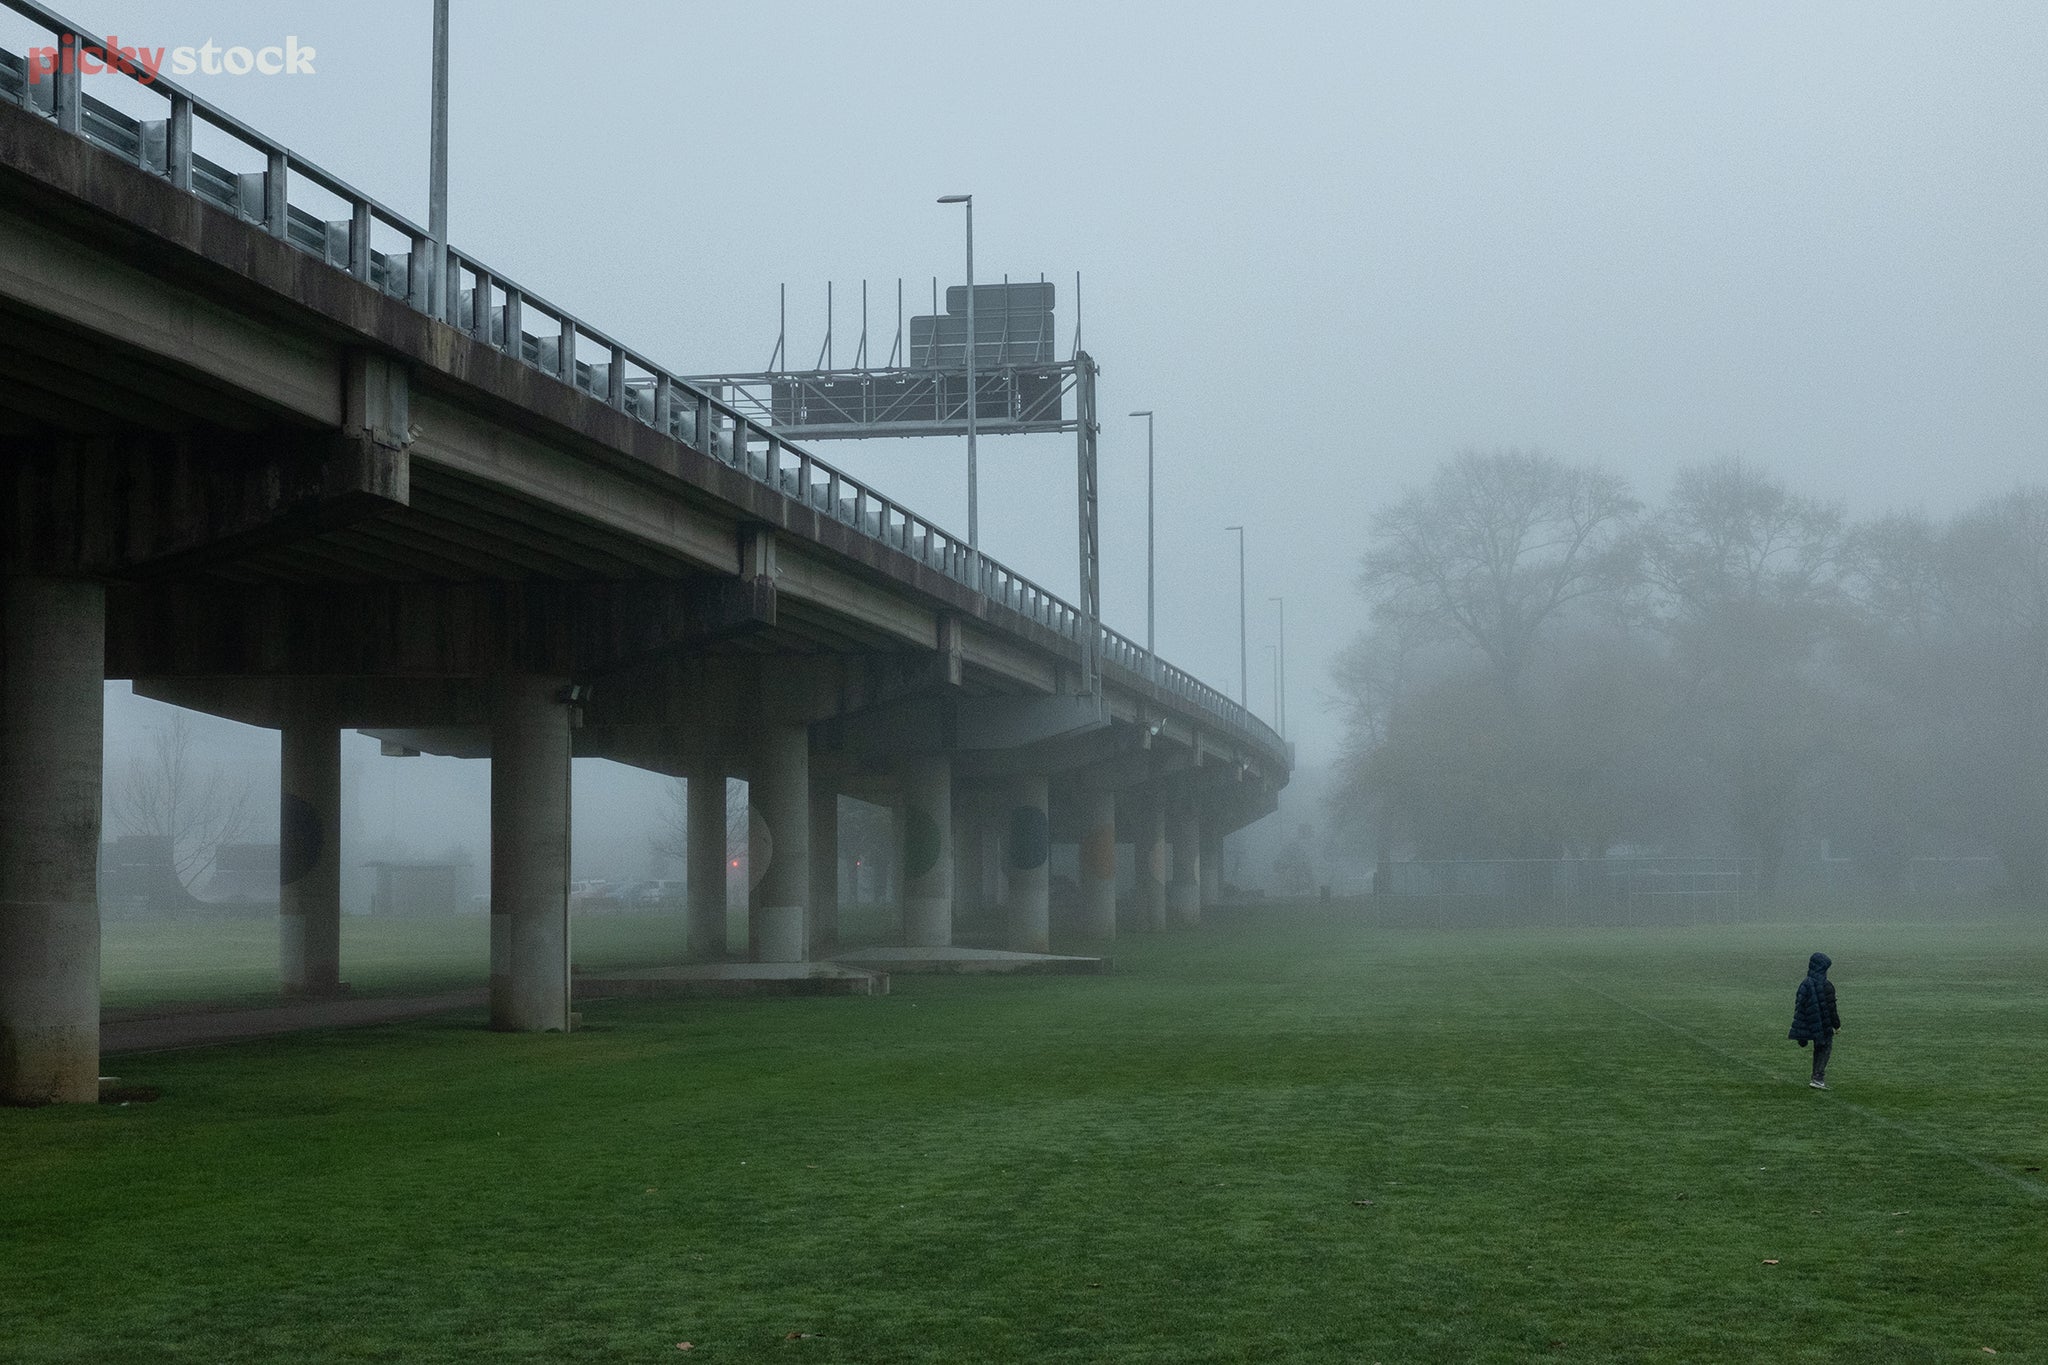 Landscape is a concrete overpass stretching high above green sports fields. A lone watcher in a dark blue puffer jackets stares into the distance as grey fog lurks around.